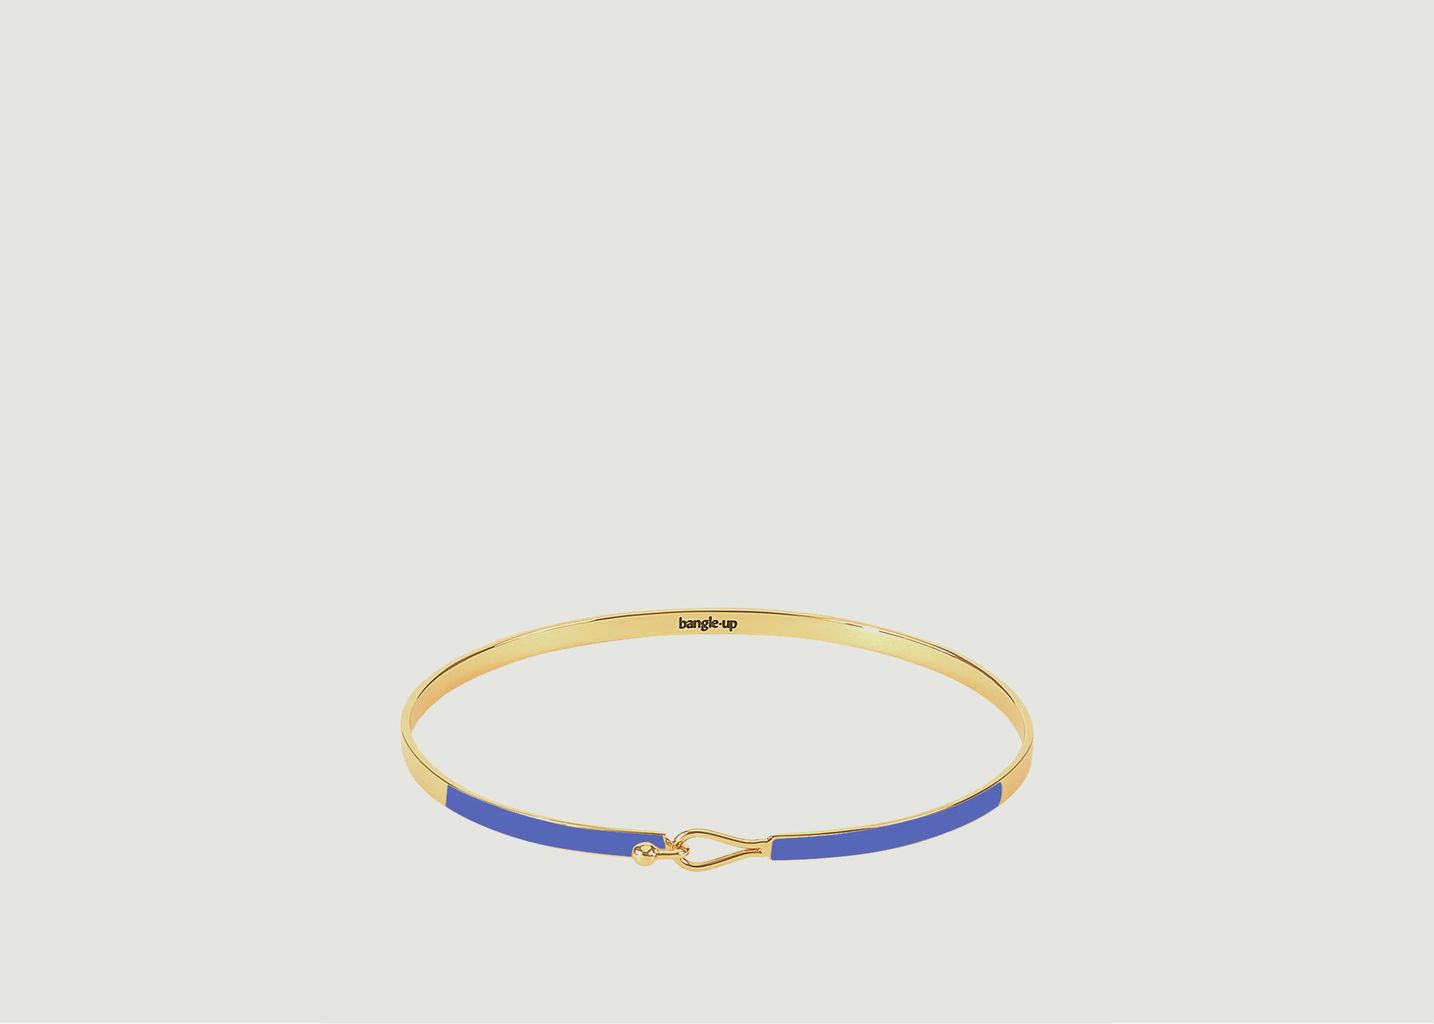 Lily bracelet with drop clasp in gold lacquered metal - Bangle Up